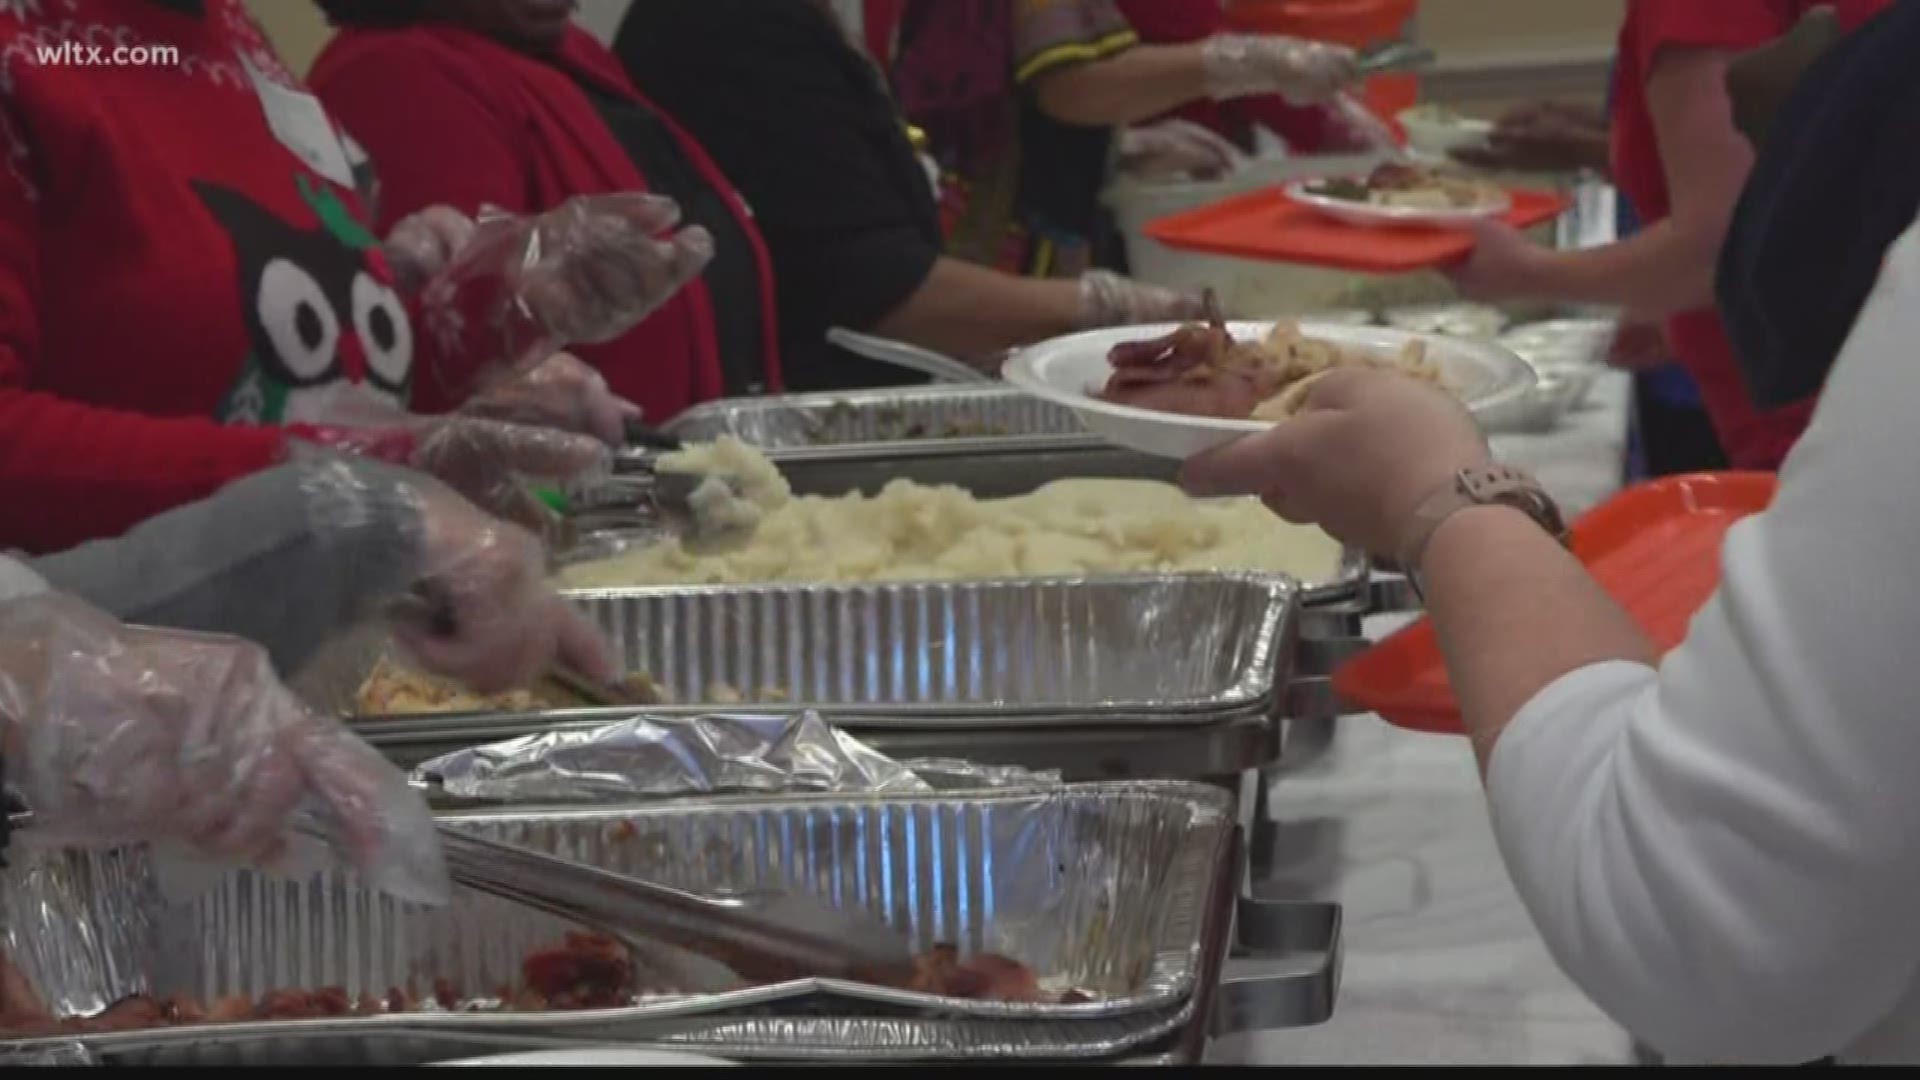 St. Peter's Catholic Church fed well over a thousand people in need at their 34th Christmas Feast.